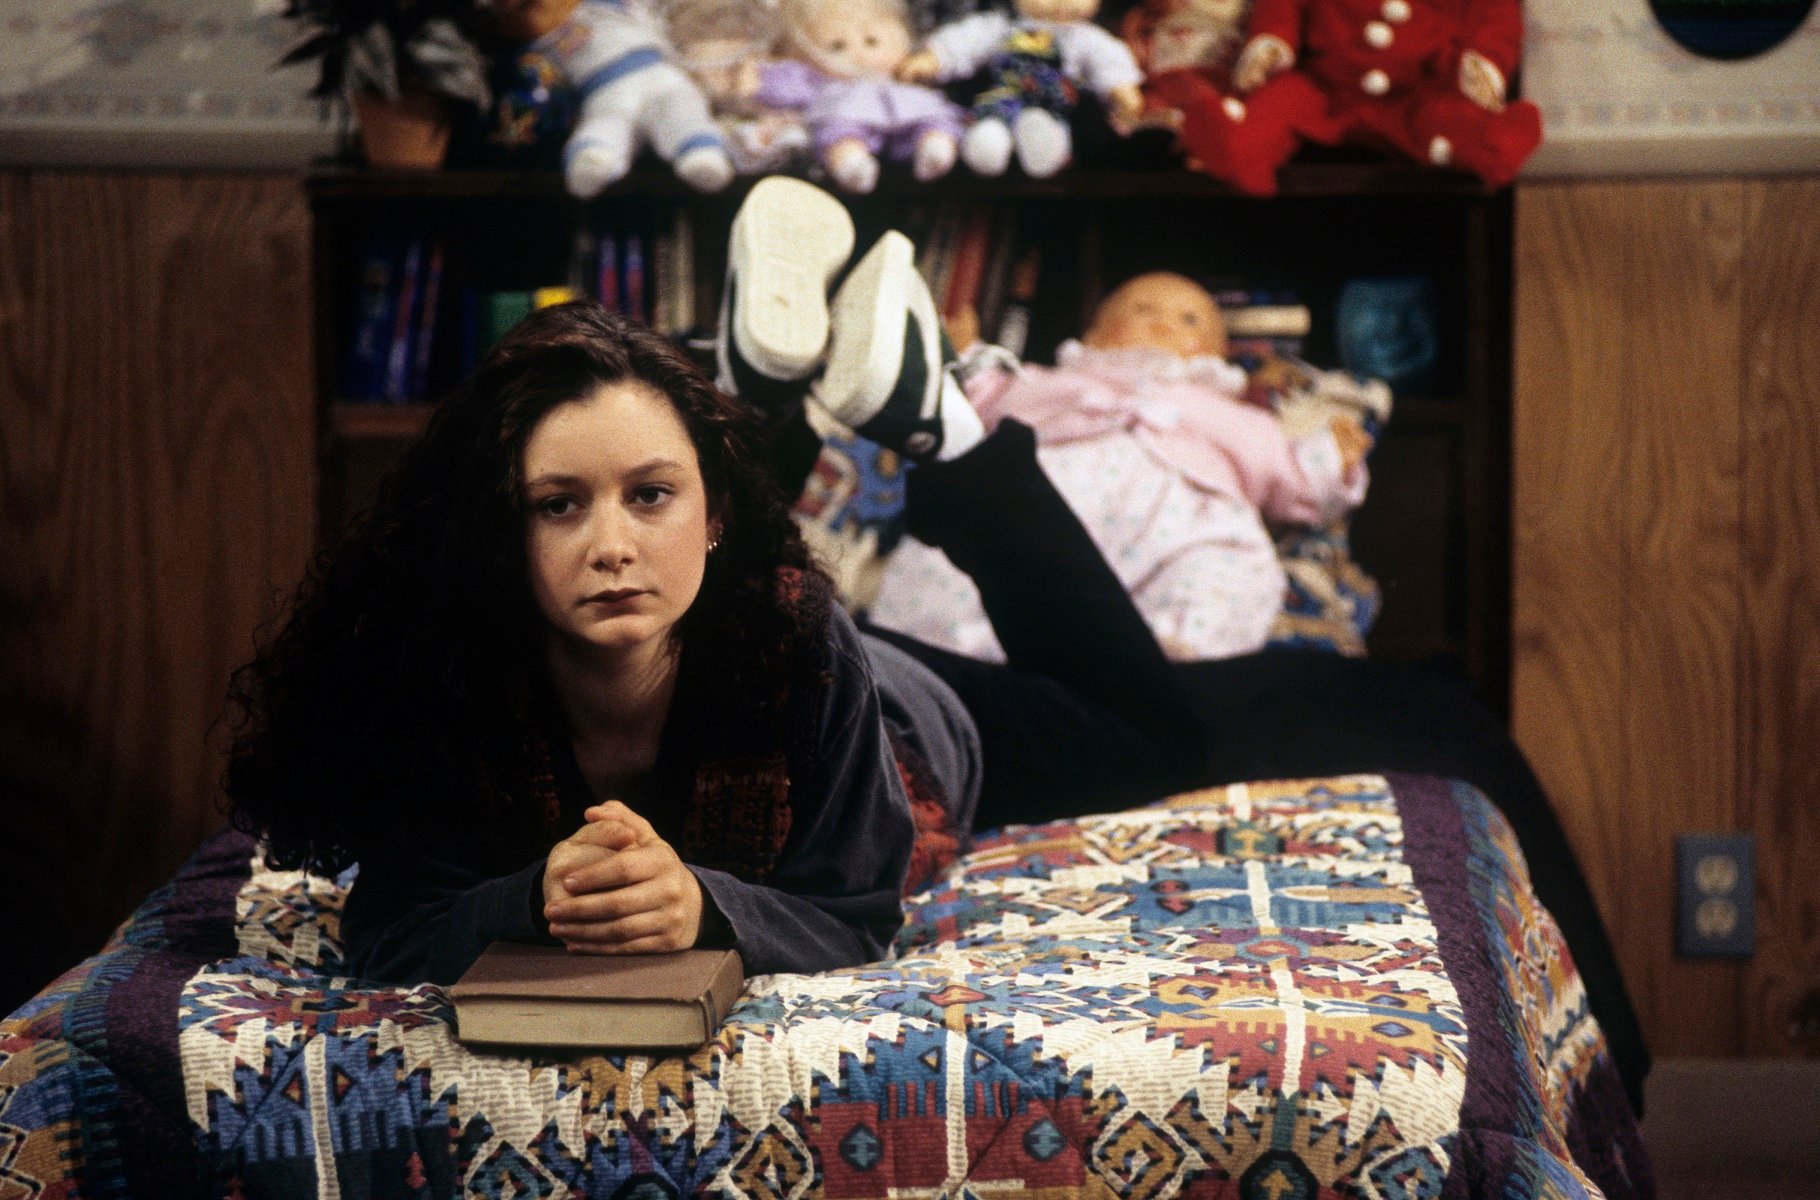 Famed Showrunners, Amy Sherman-Palladino, and Chuck Lorre, Both Wrote for ‘Roseanne’